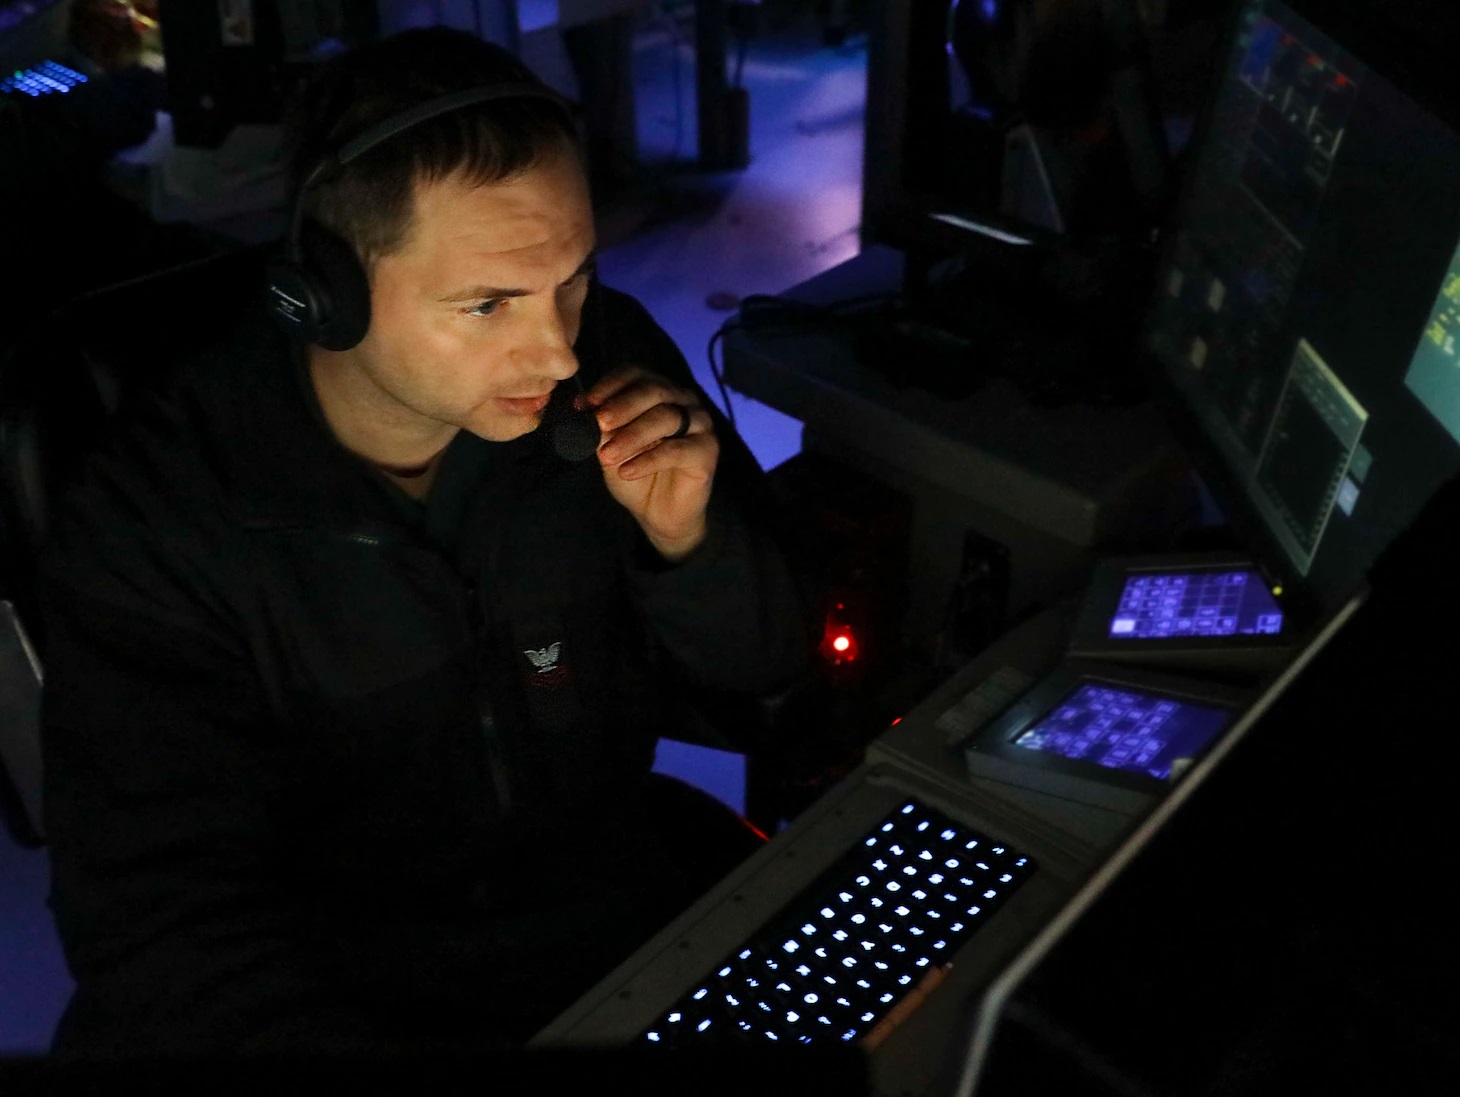 Operations Specialist 1st Class Justin Brown, from Albany, N.Y., monitors the surface and air picture from inside the combat information center aboard Arleigh Burke-class guided-missile destroyer USS Benfold (DDG 65) while conducting routine underway operations.